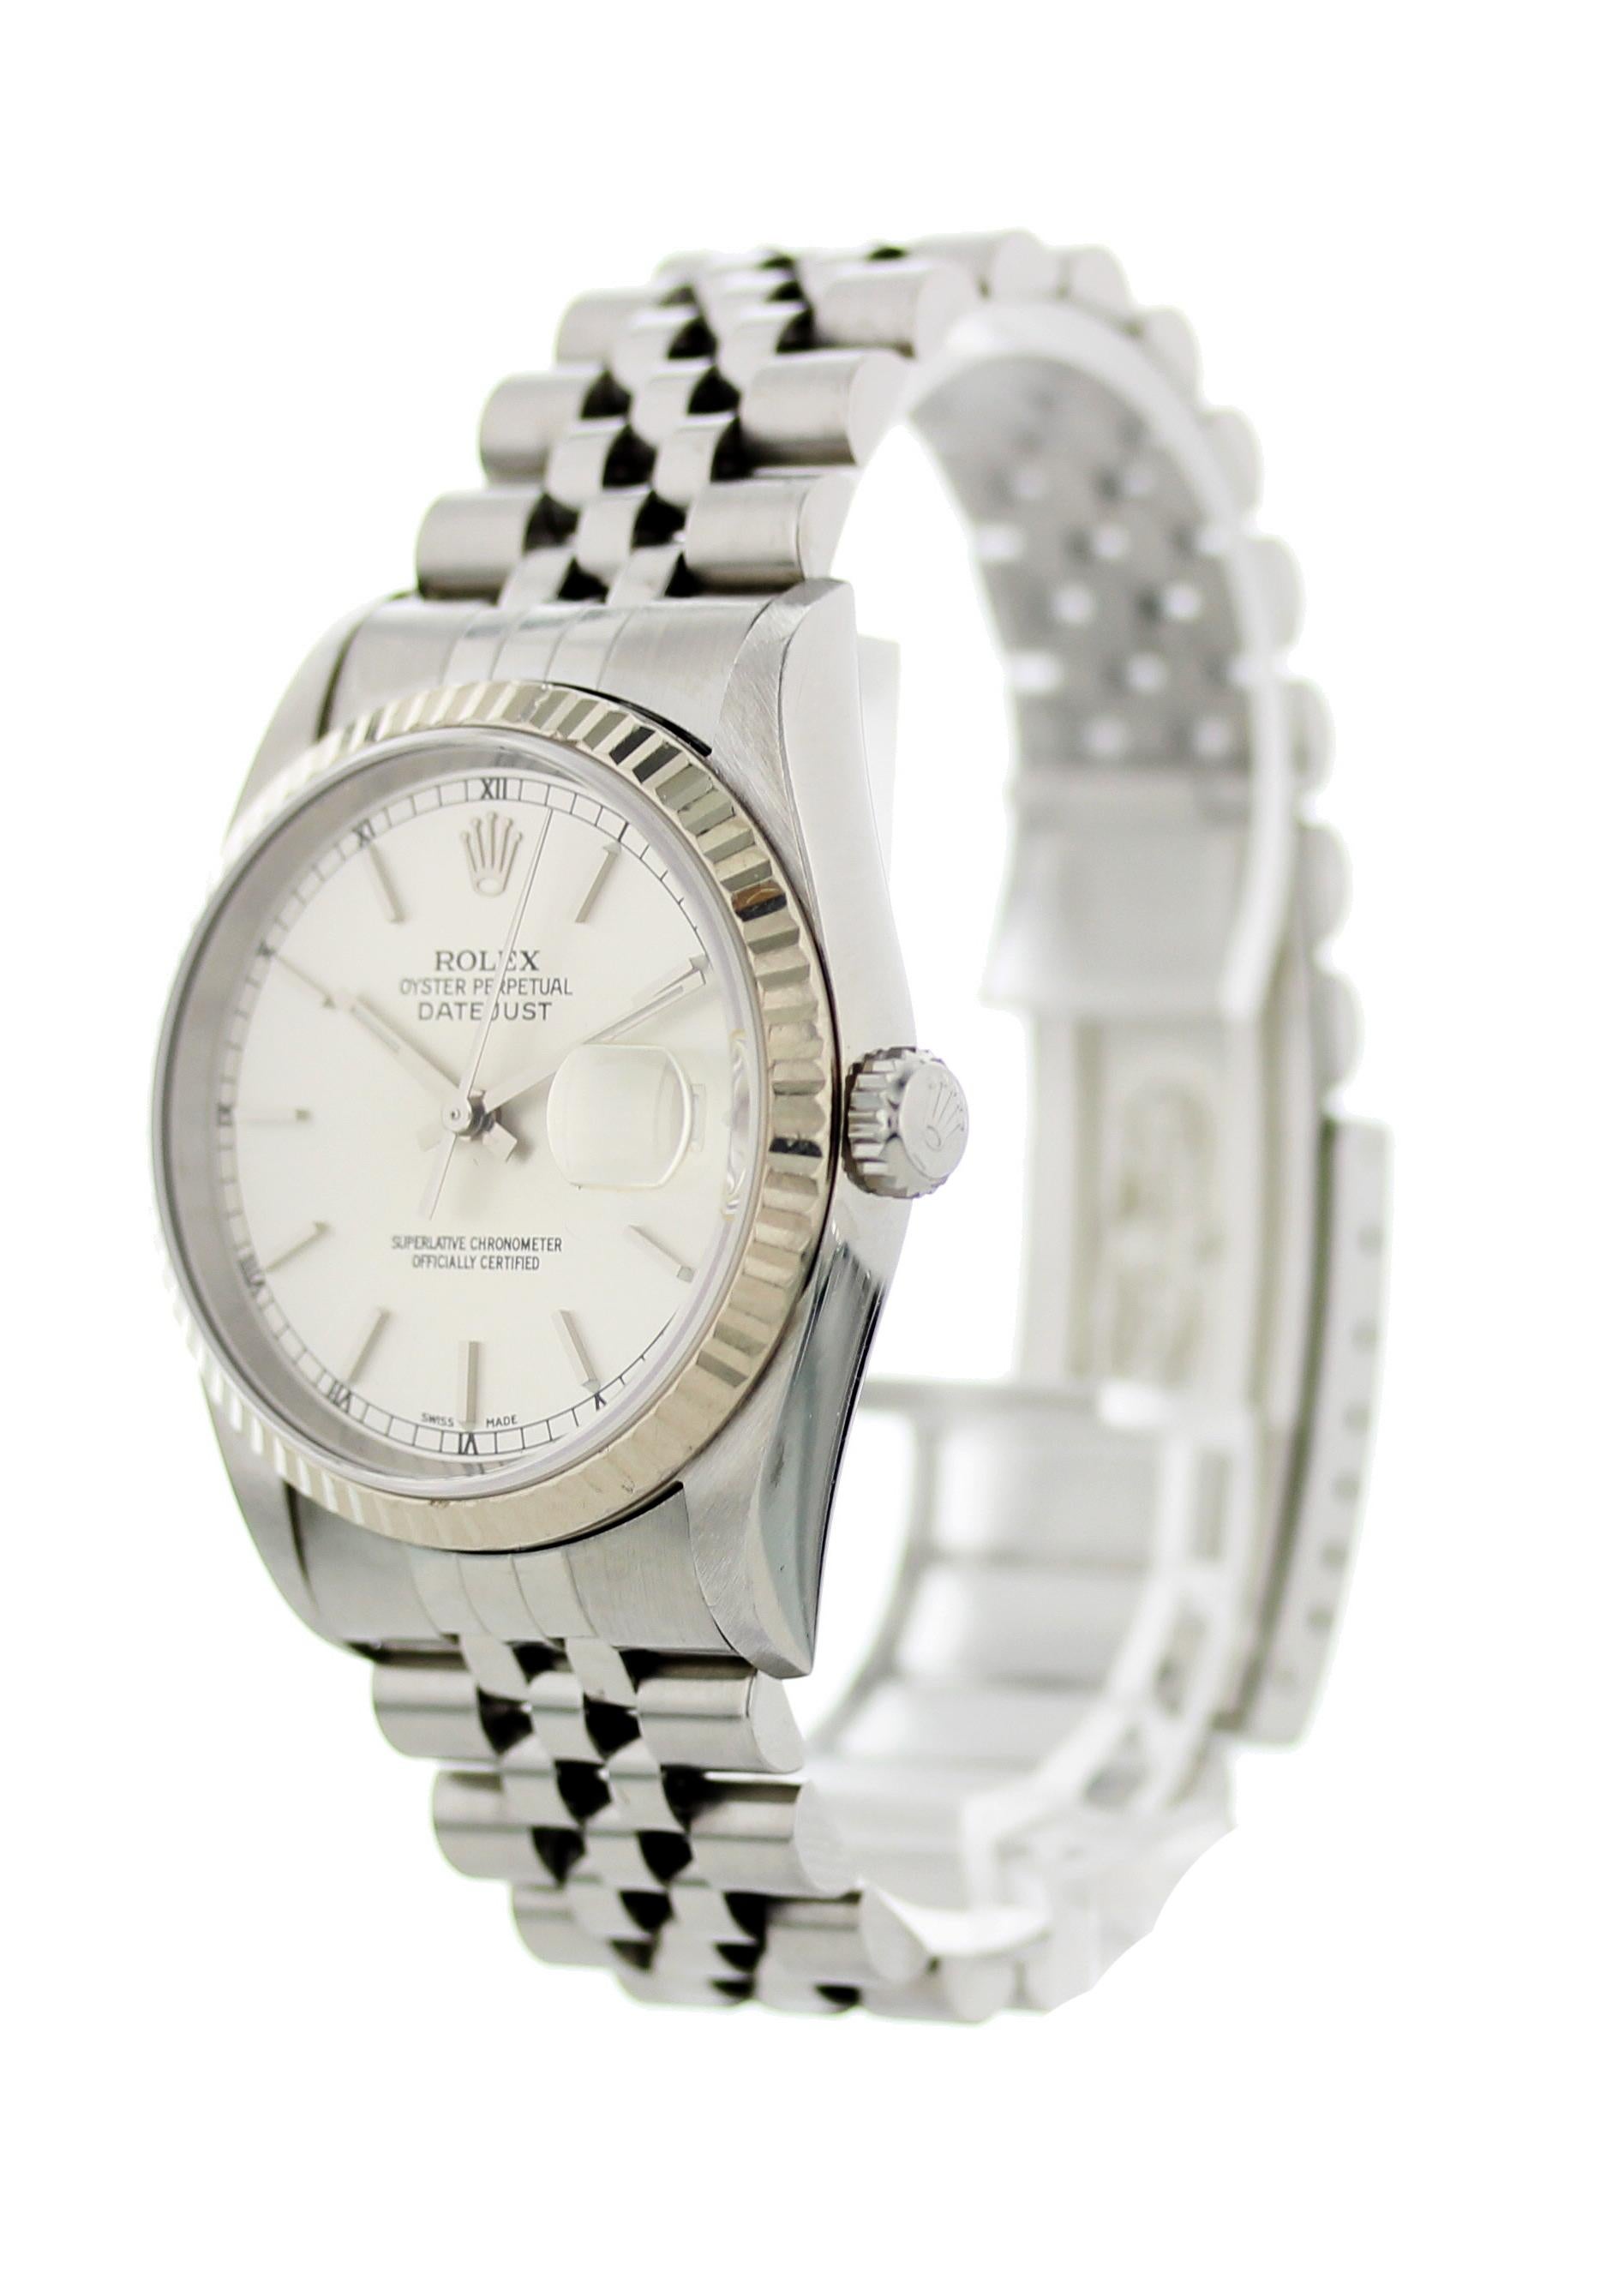 Rolex Oyster Perpetual Datejust 16234 Men's Watch.
36mm Stainless Steel case. 
White Gold Stationary bezel. 
Silver dial with Steel hands and index hour markers. 
Minute markers on the outer dial printed Roman numeral hour markers. 
Date display at